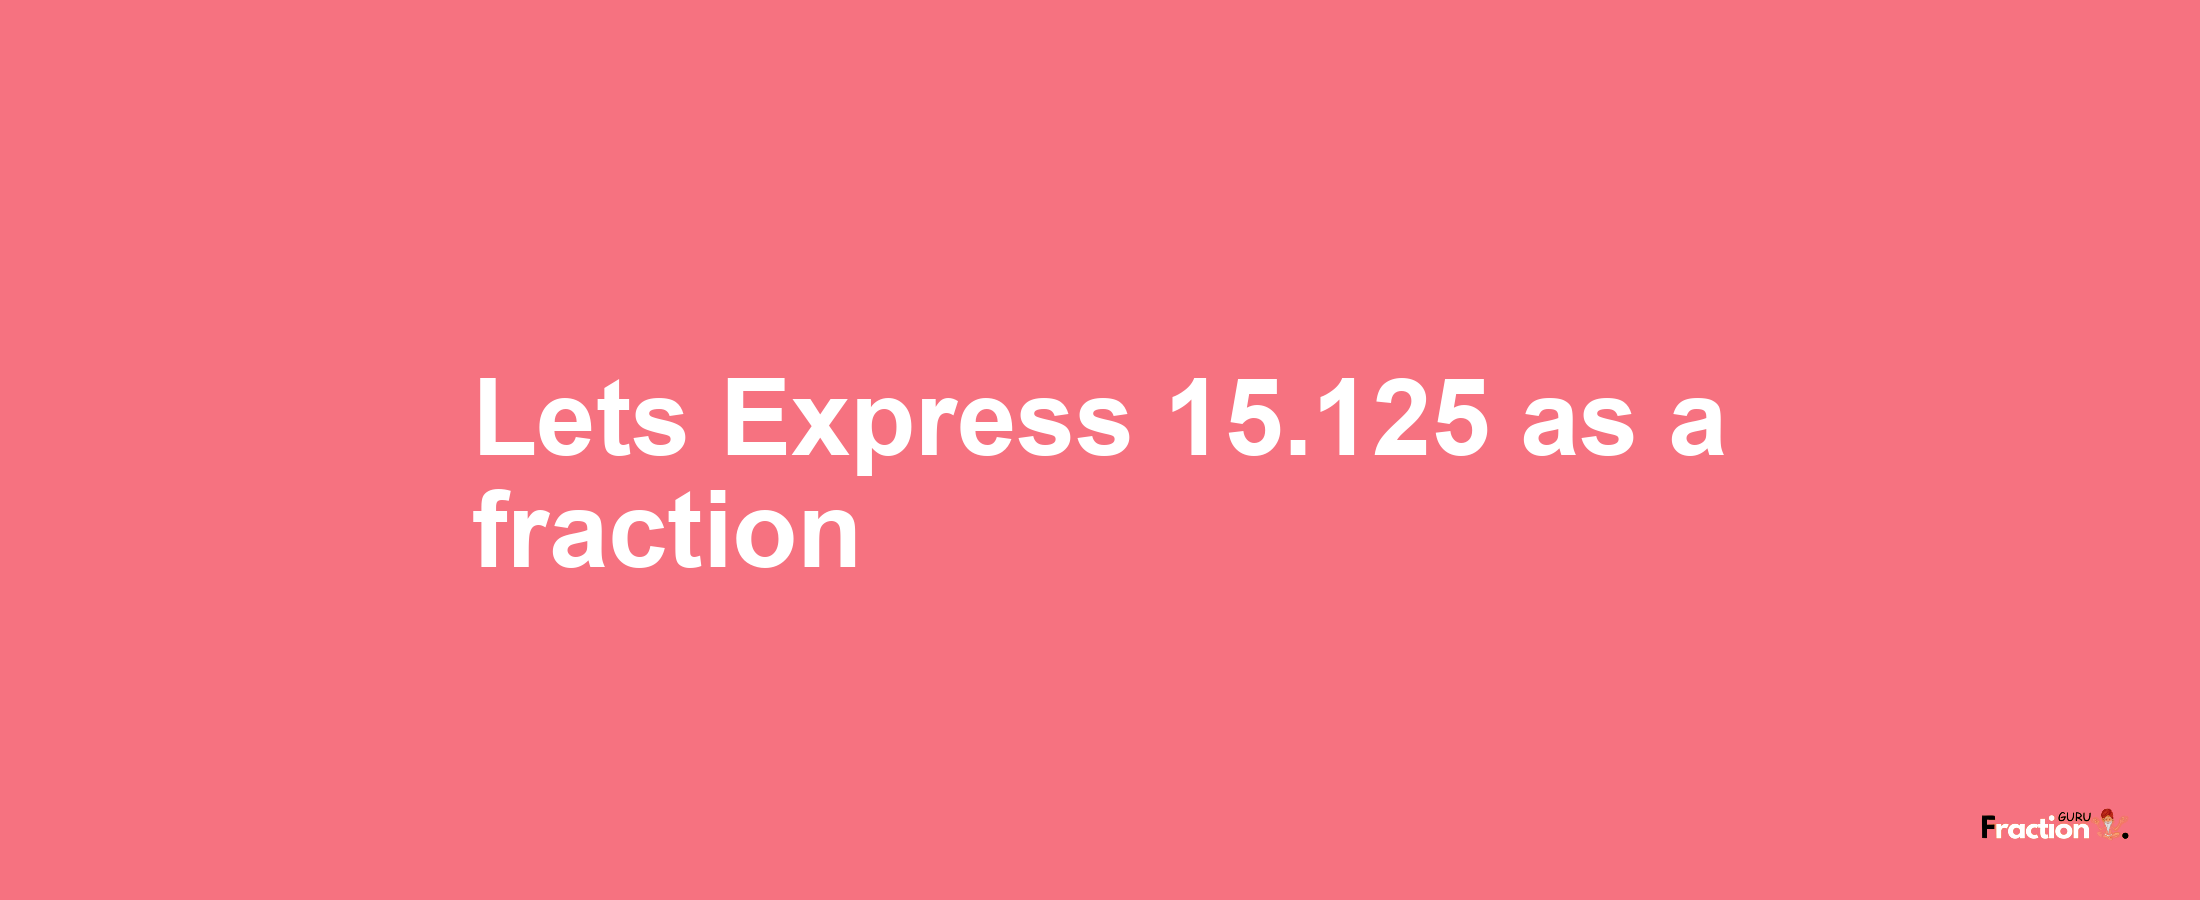 Lets Express 15.125 as afraction